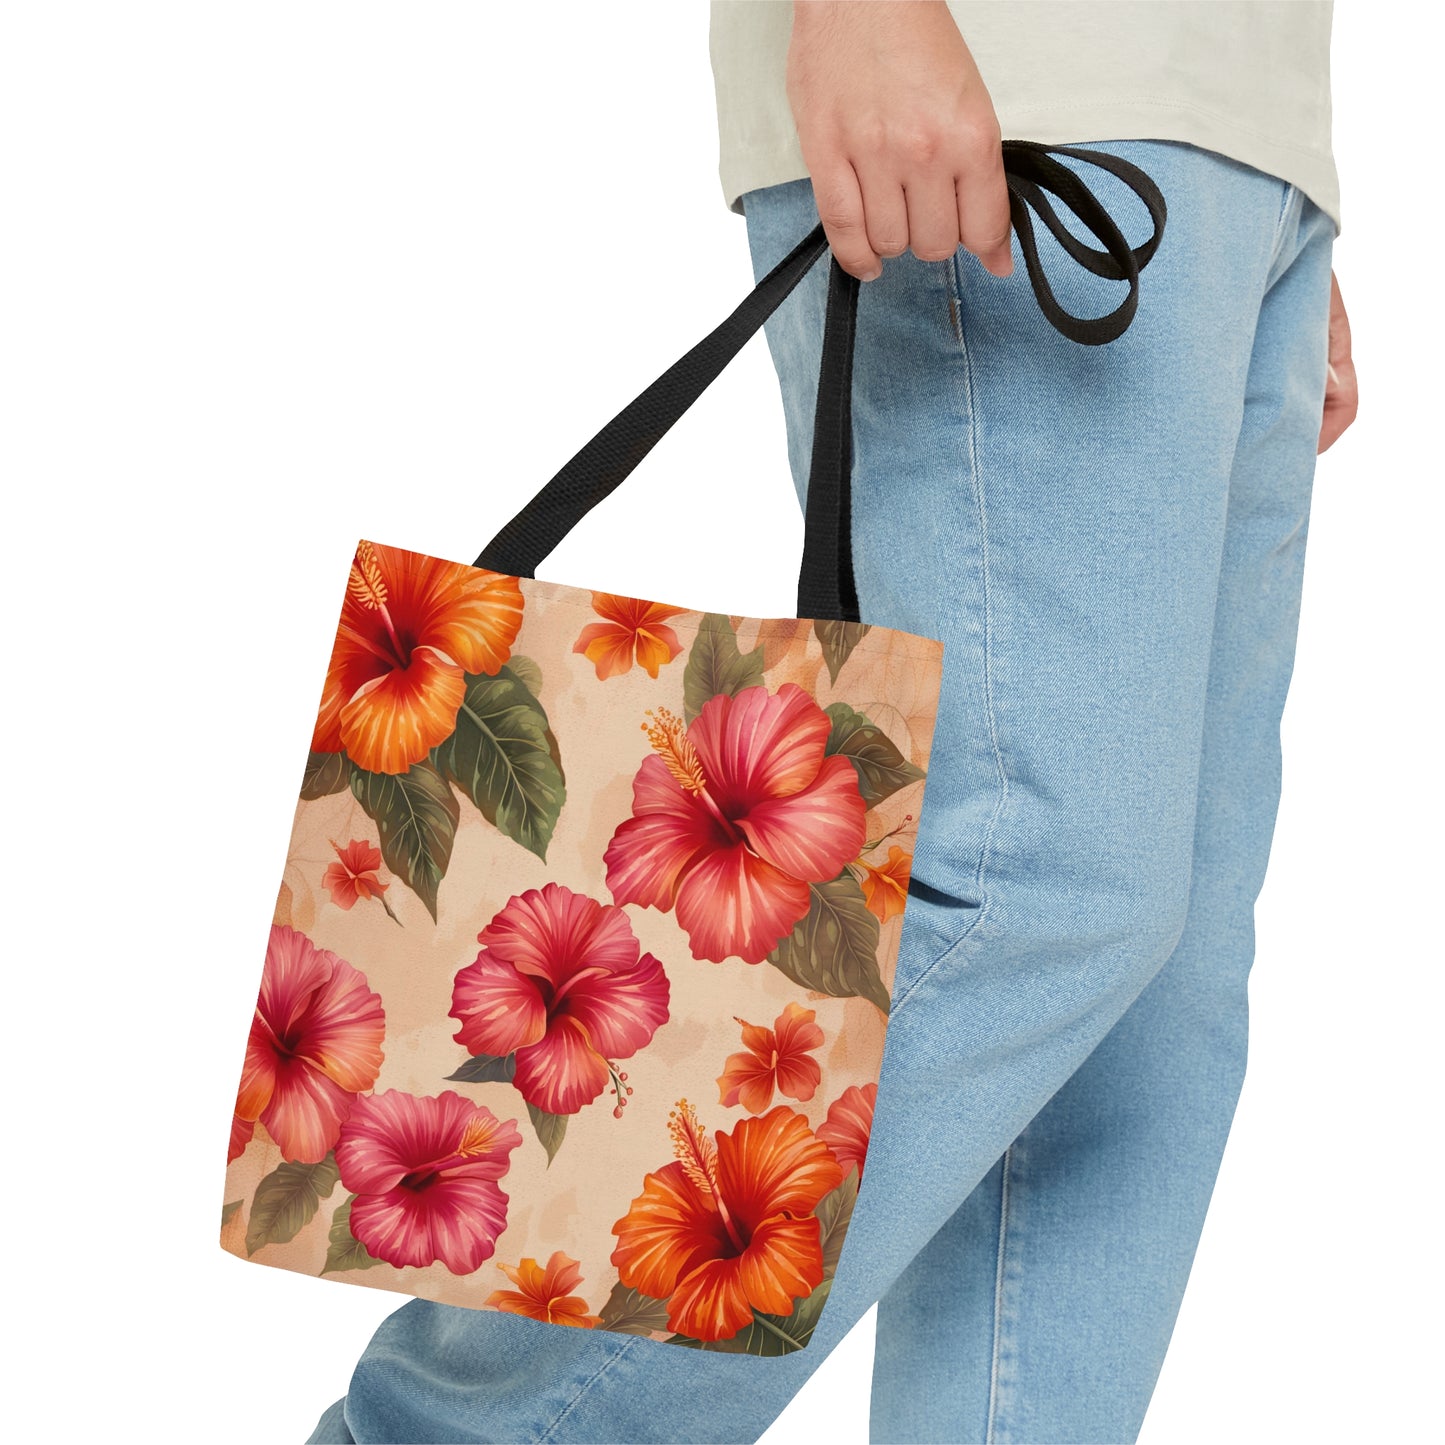 Pink and Orange Hibiscus Flower Printed on Tote Bag small